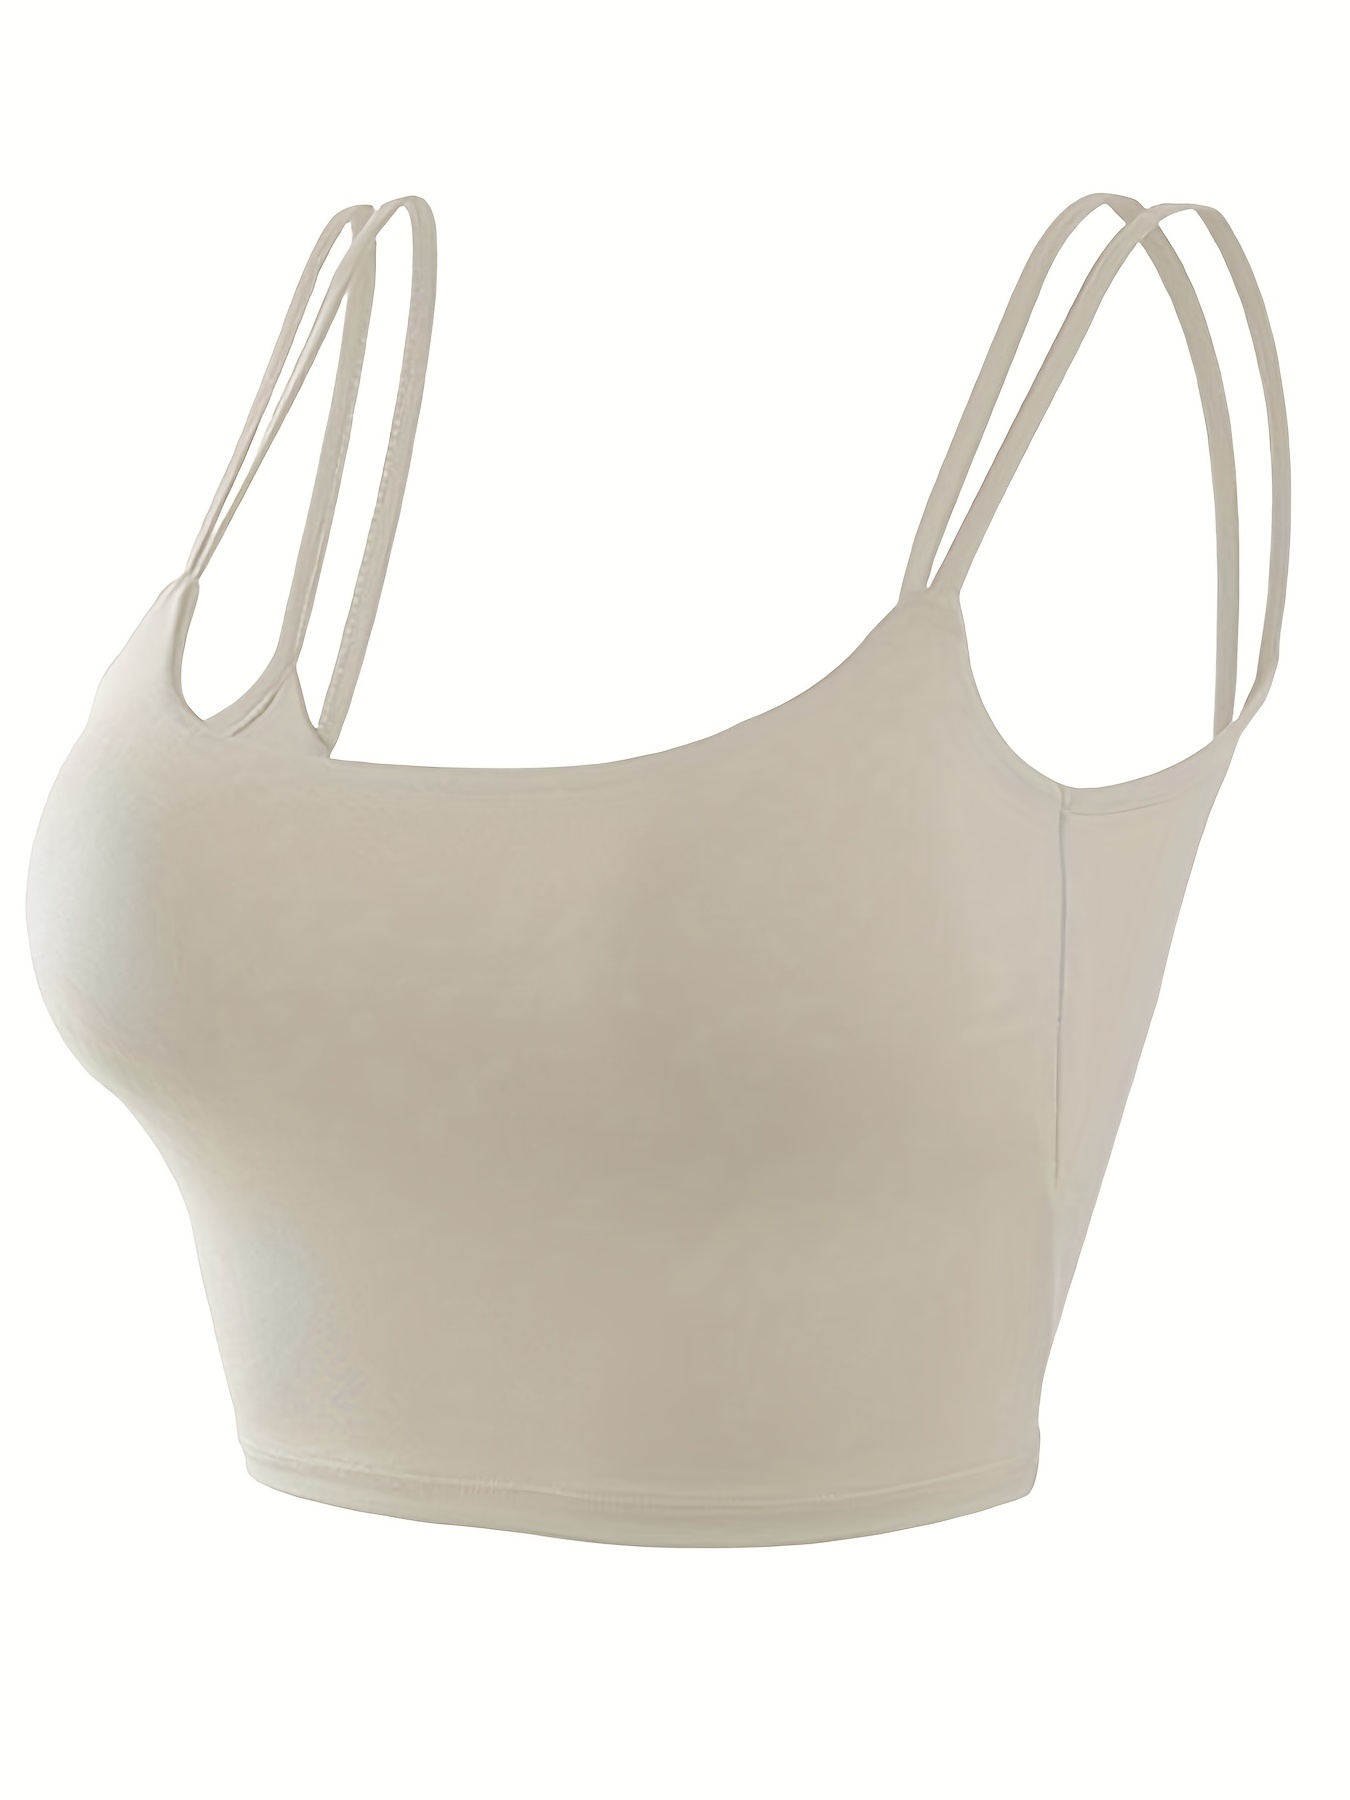 Copper Chocolate Sports Bra with Low Back and Corset – New York Pilates